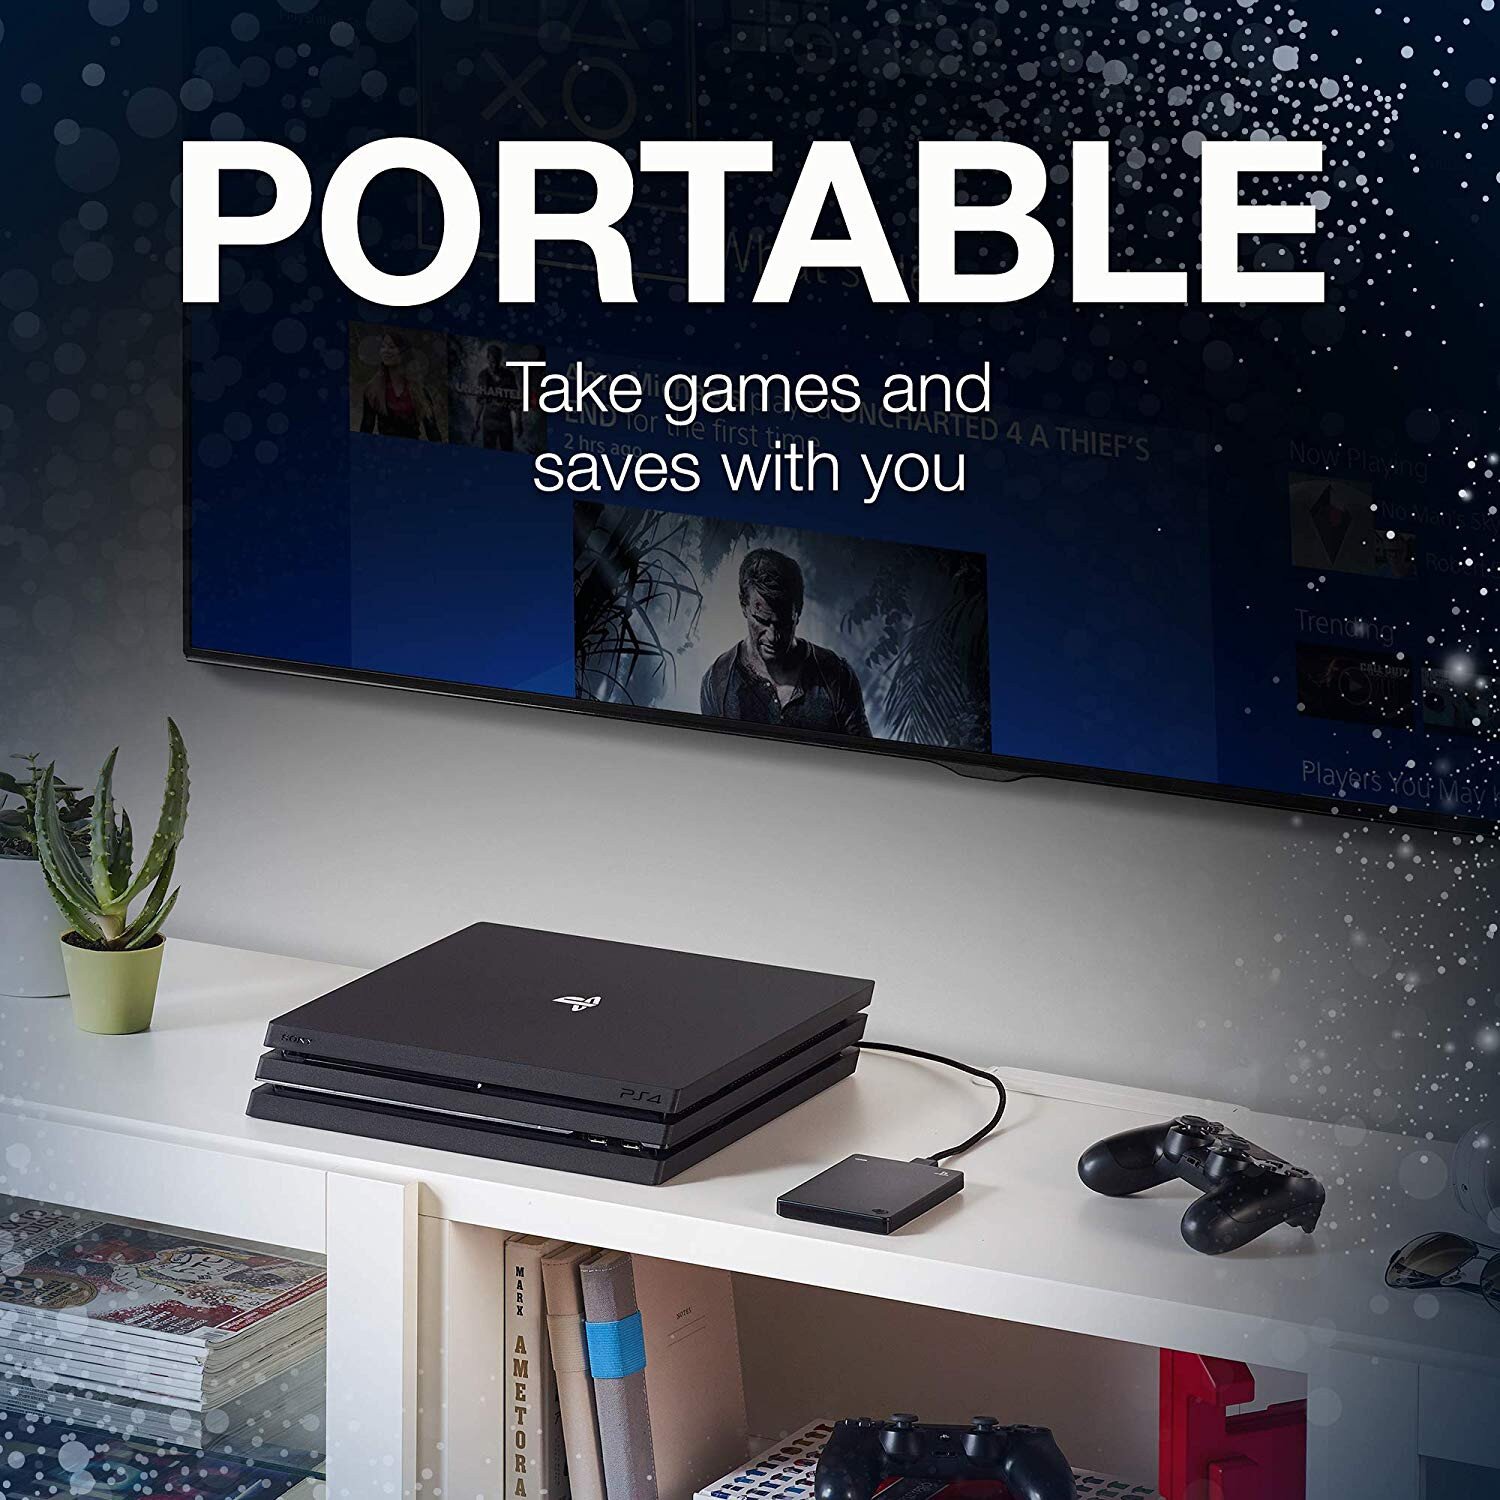 seagate game drive for ps4 systems